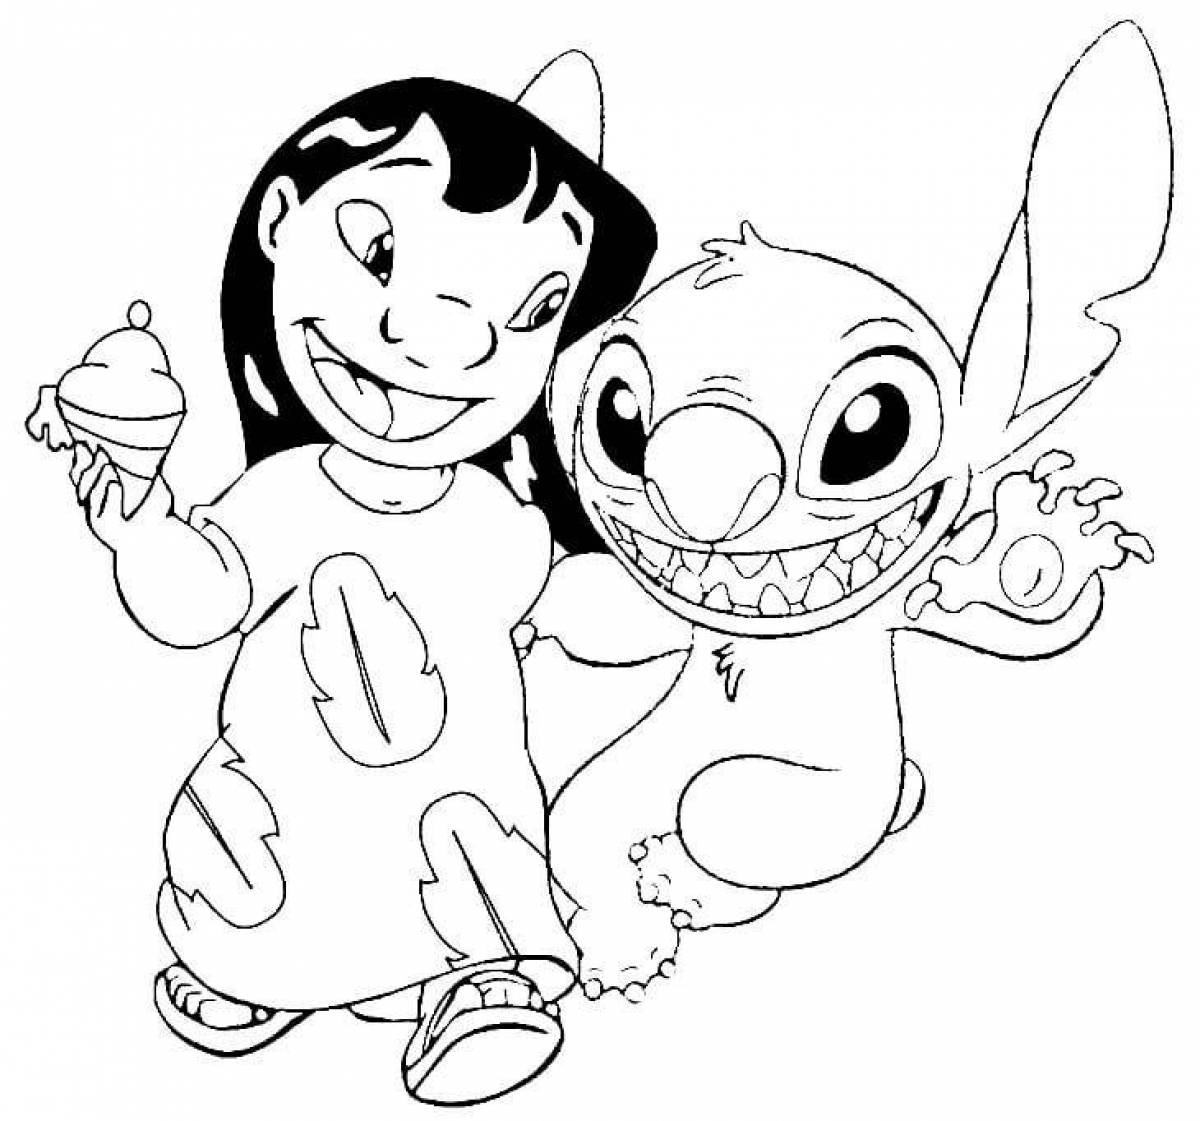 Stitch and lilo radiant coloring